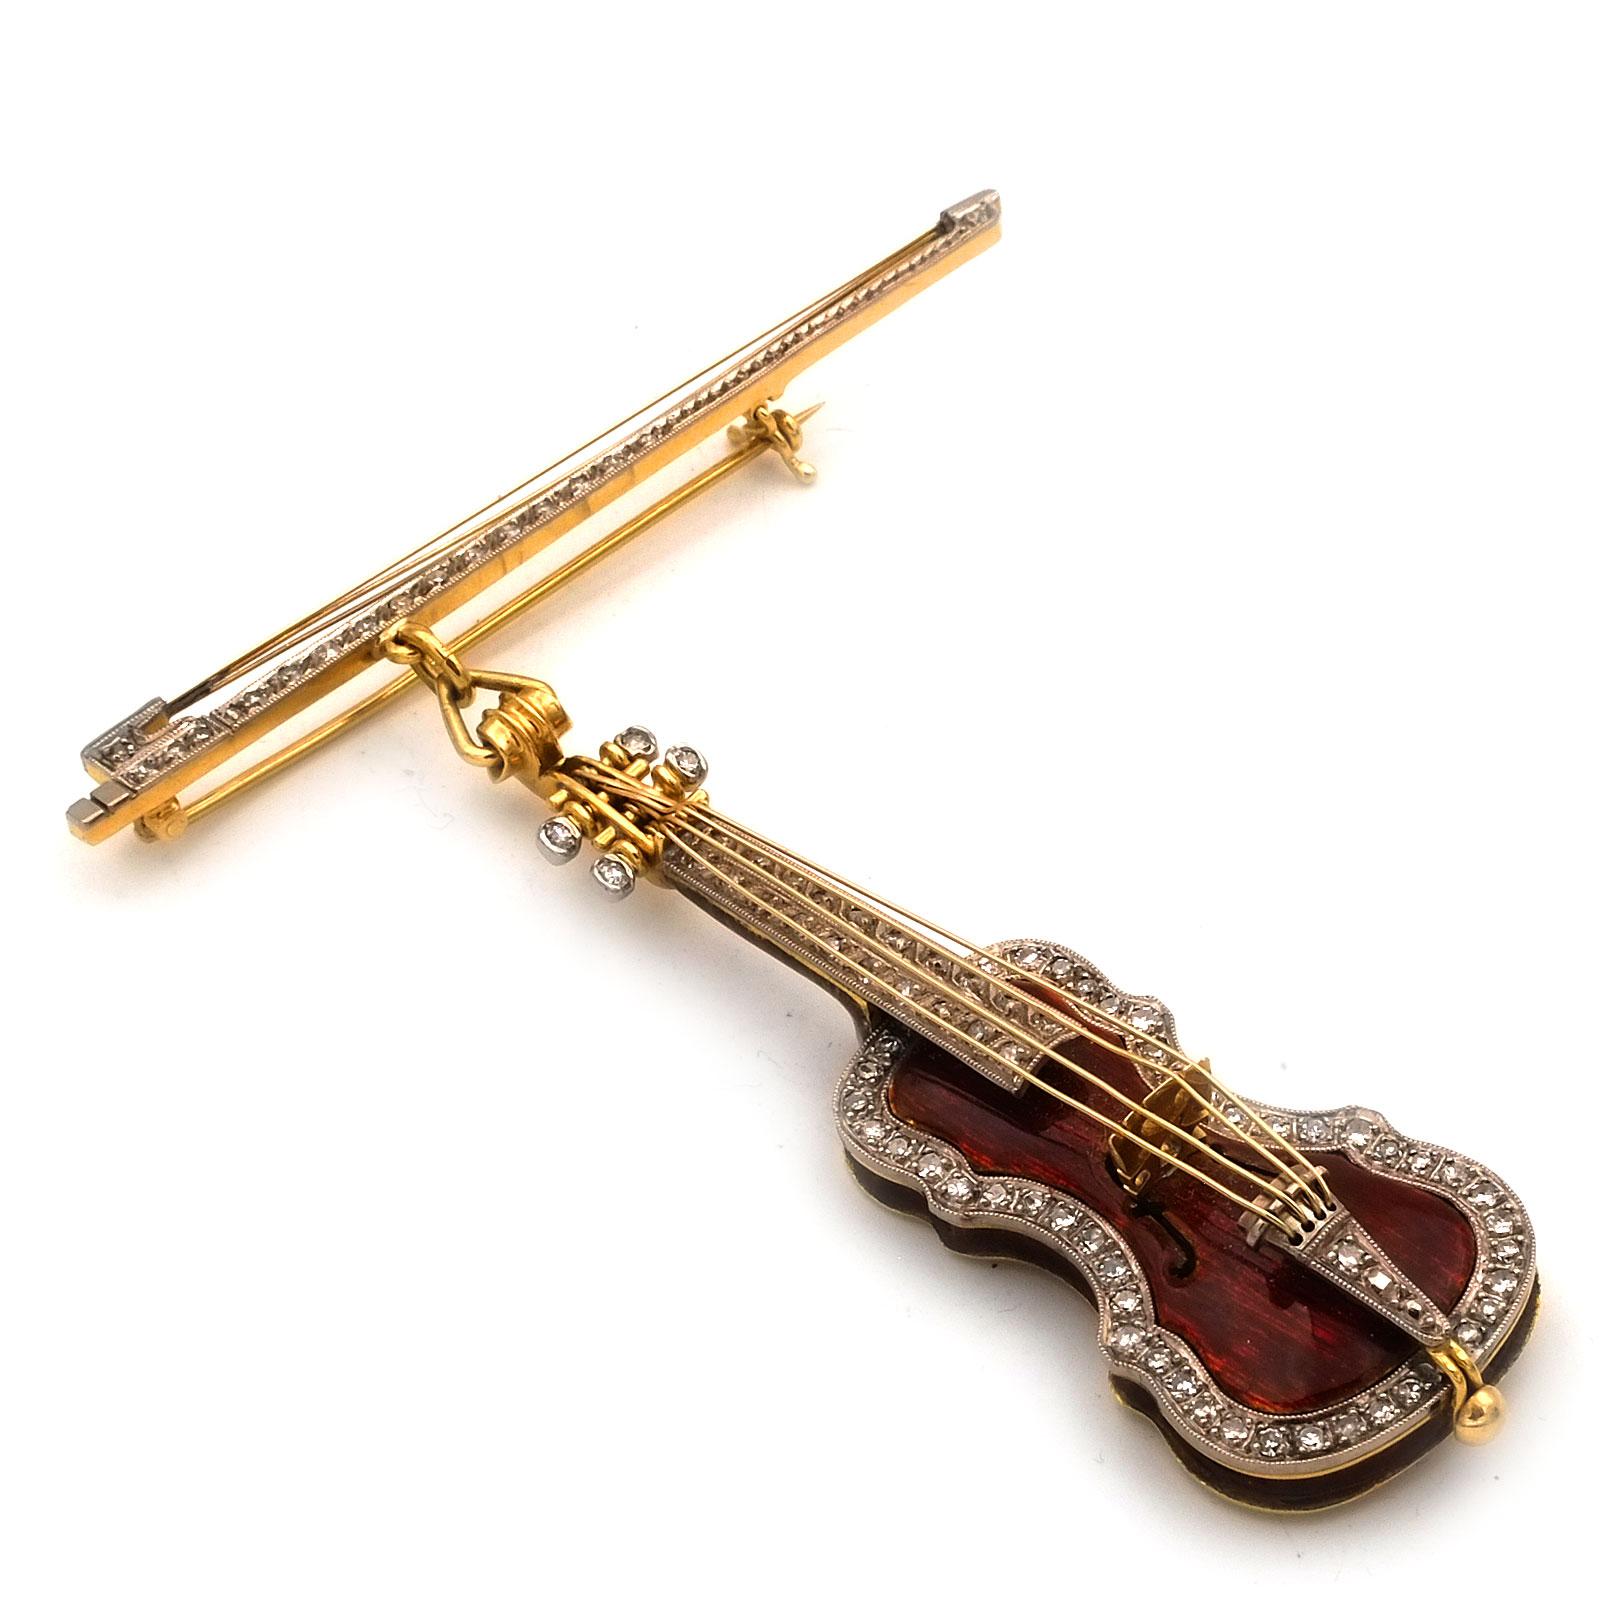 18K Gold Diamond and Enamel Stradivari Violin and Bow Brooch, circa 1930

Wonderful 18K  gold and diamond brooch in the shape of a lifelike Stradivarius violin, flexibly mounted on the accompanying violin bow, which also serves as a needle.